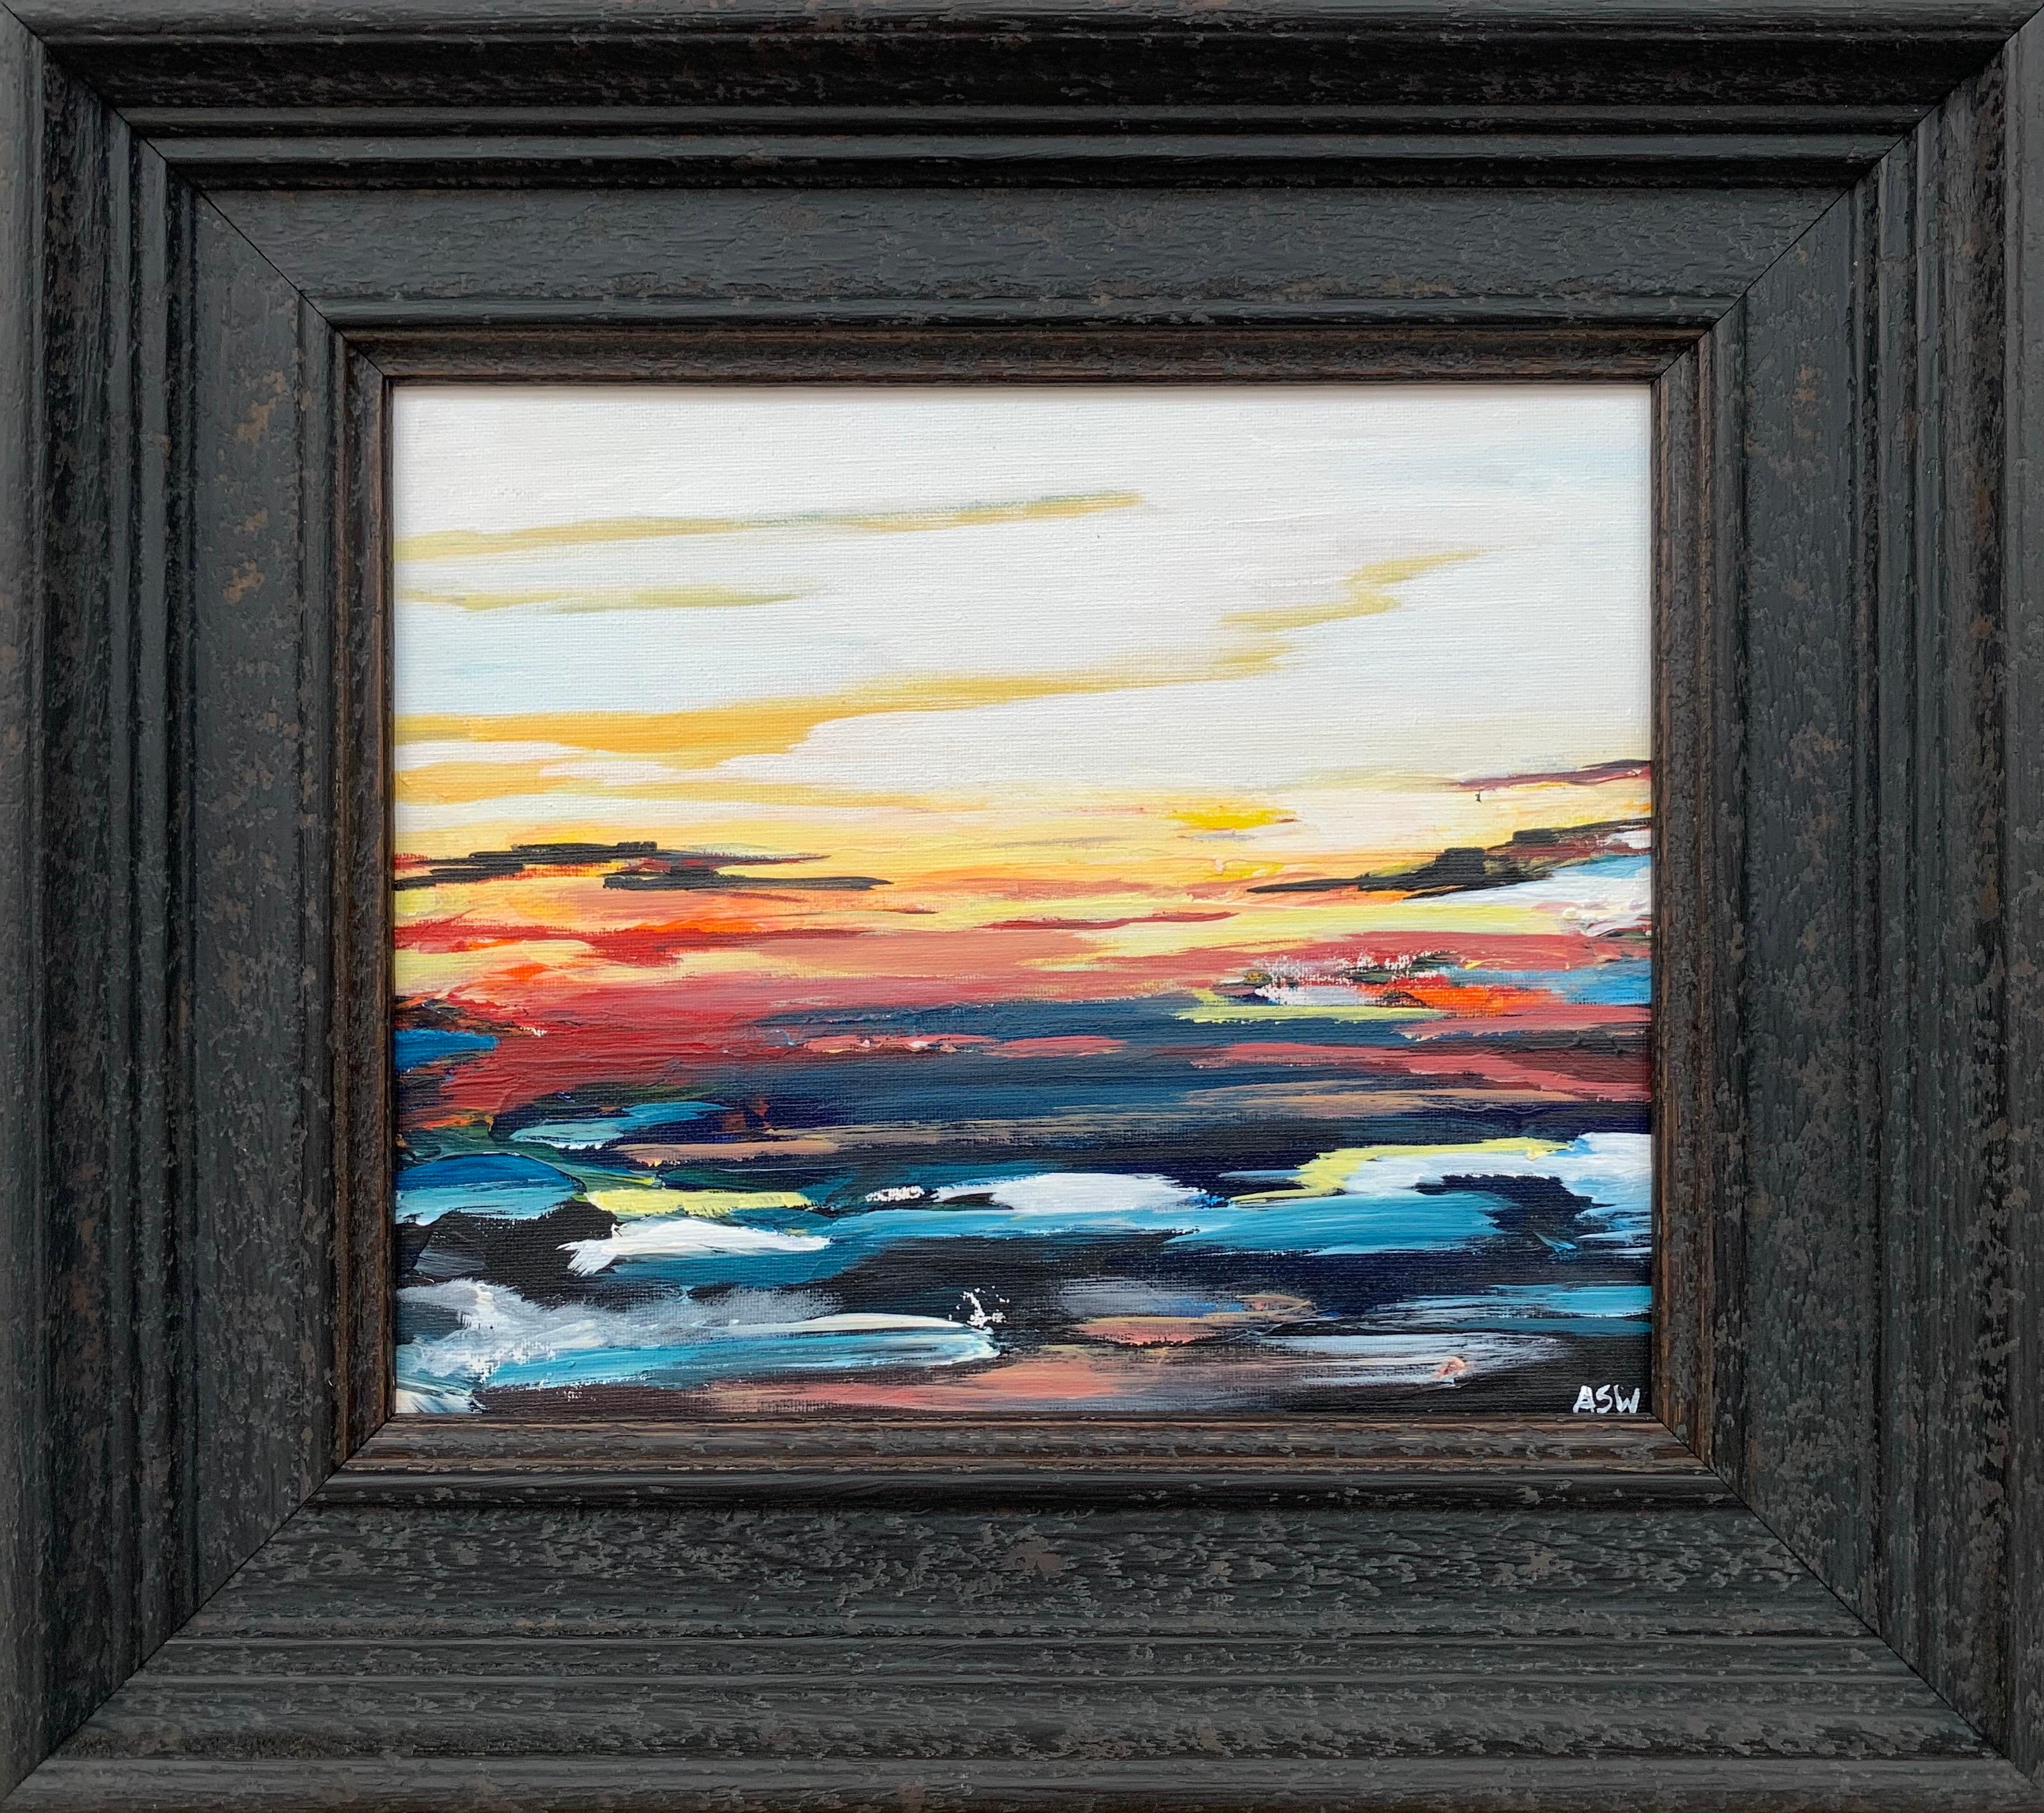 Colourful Abstract Seascape Sunset Study by Leading Contemporary British Artist